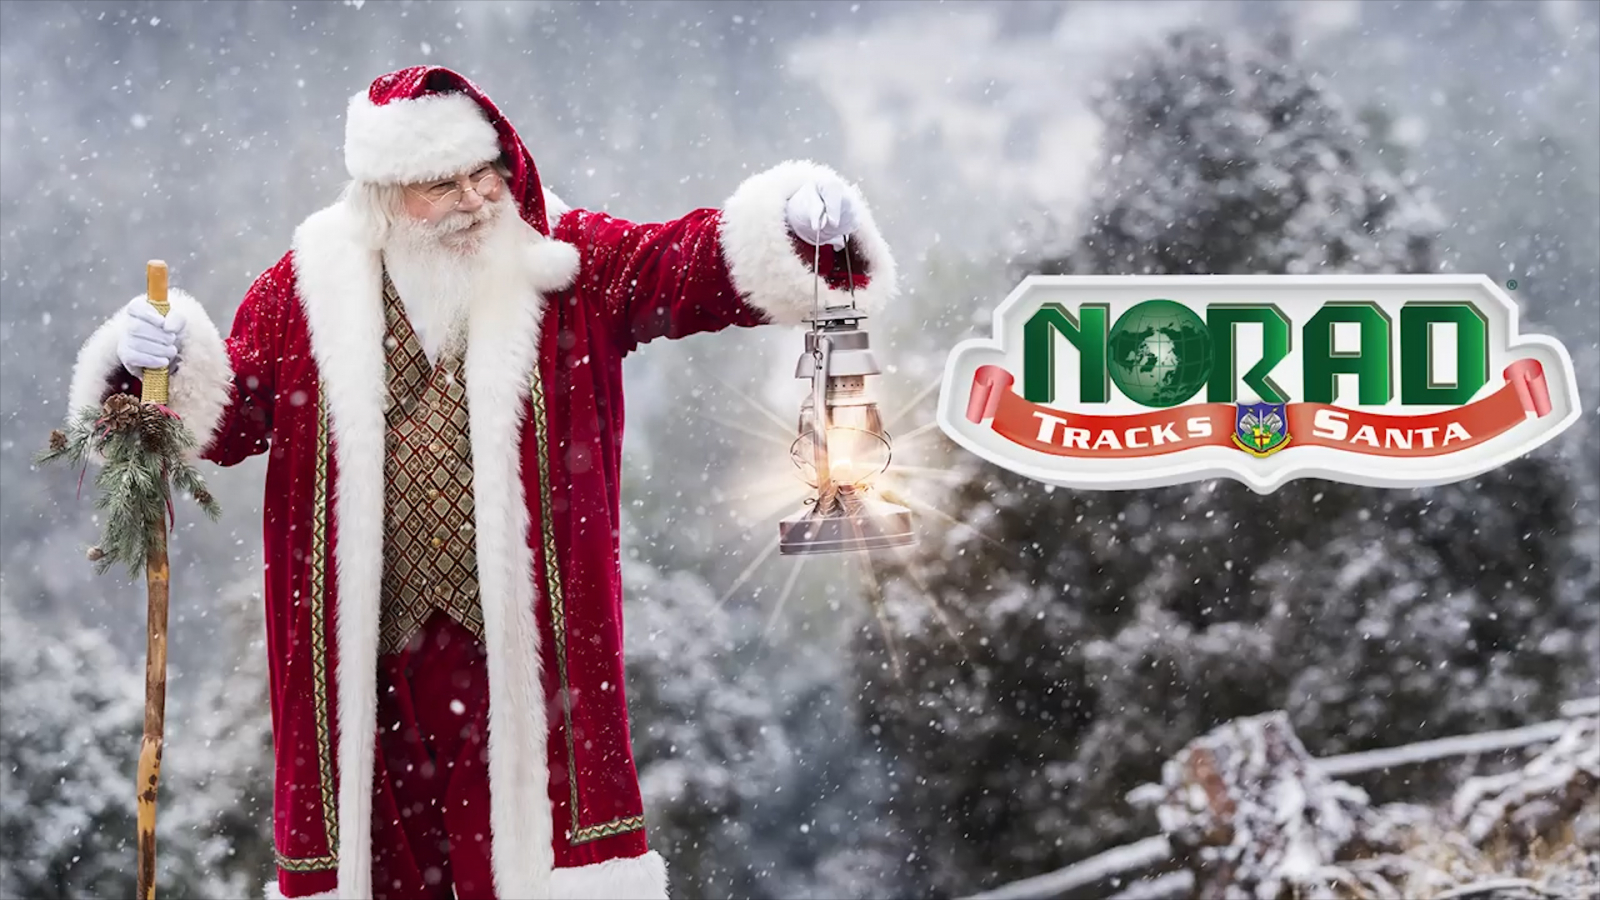 track santa claus right now